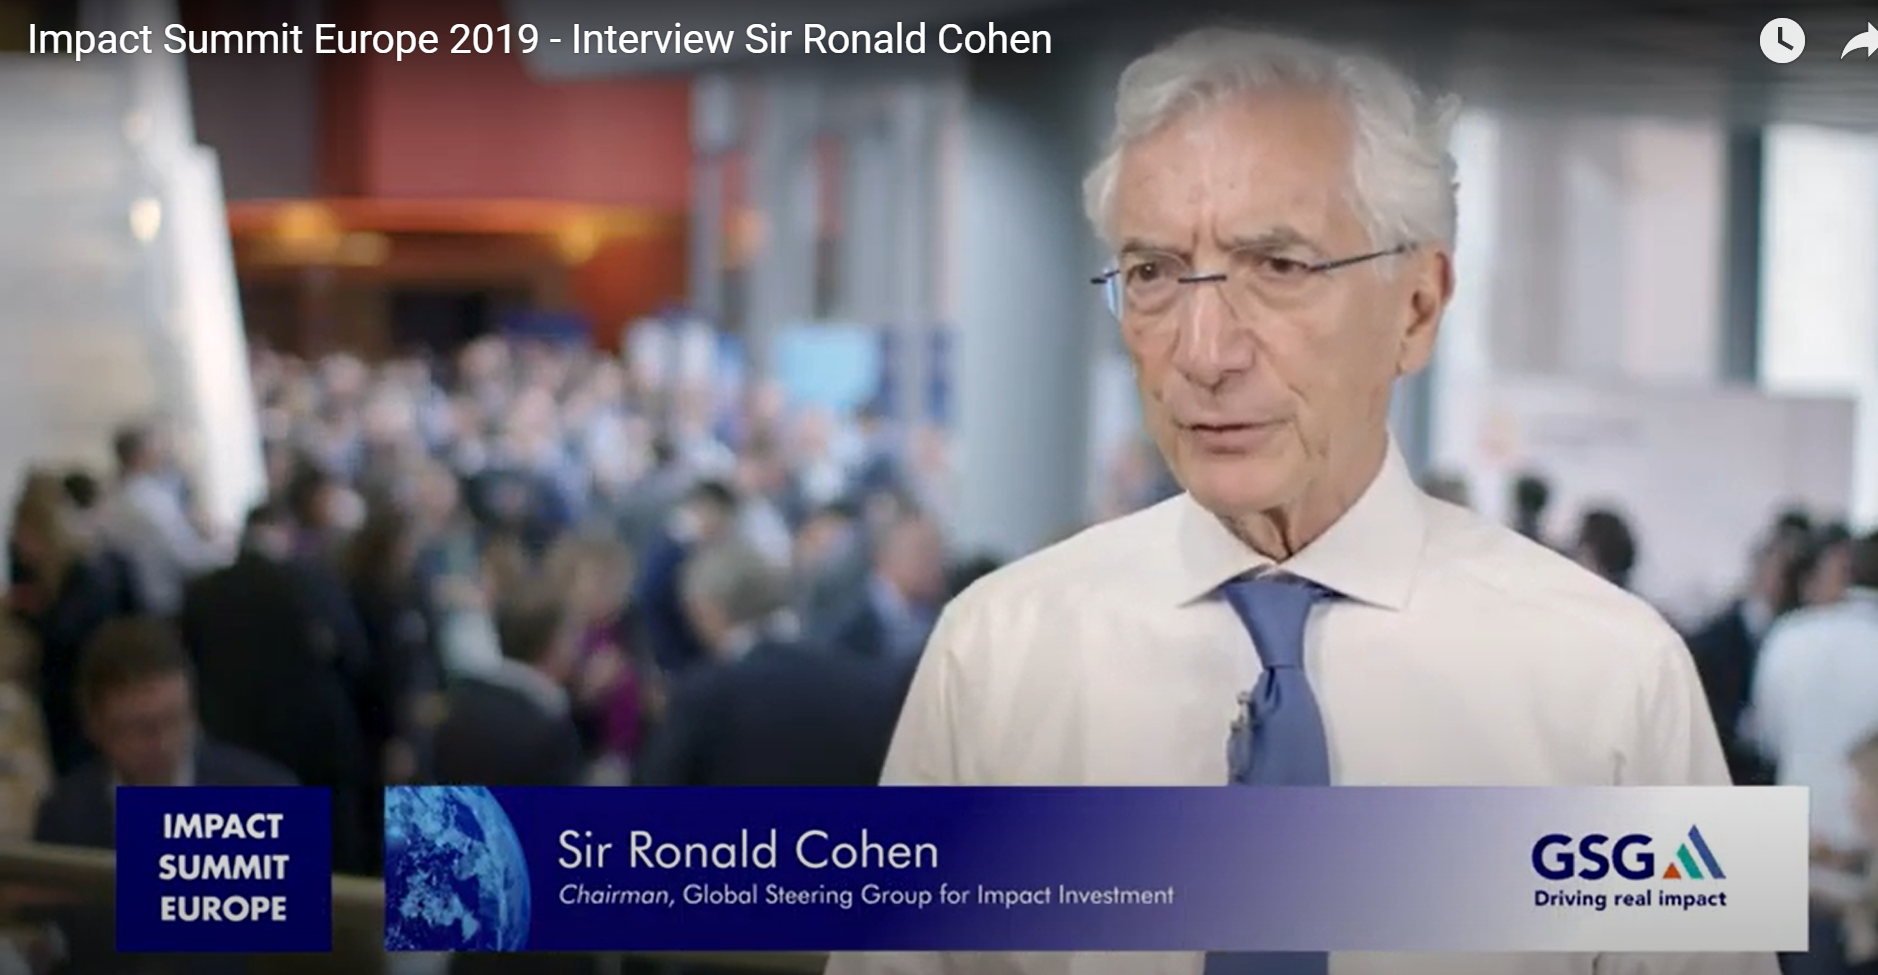 Sir Ronald Cohen I Global Steering Group for Impact Investment